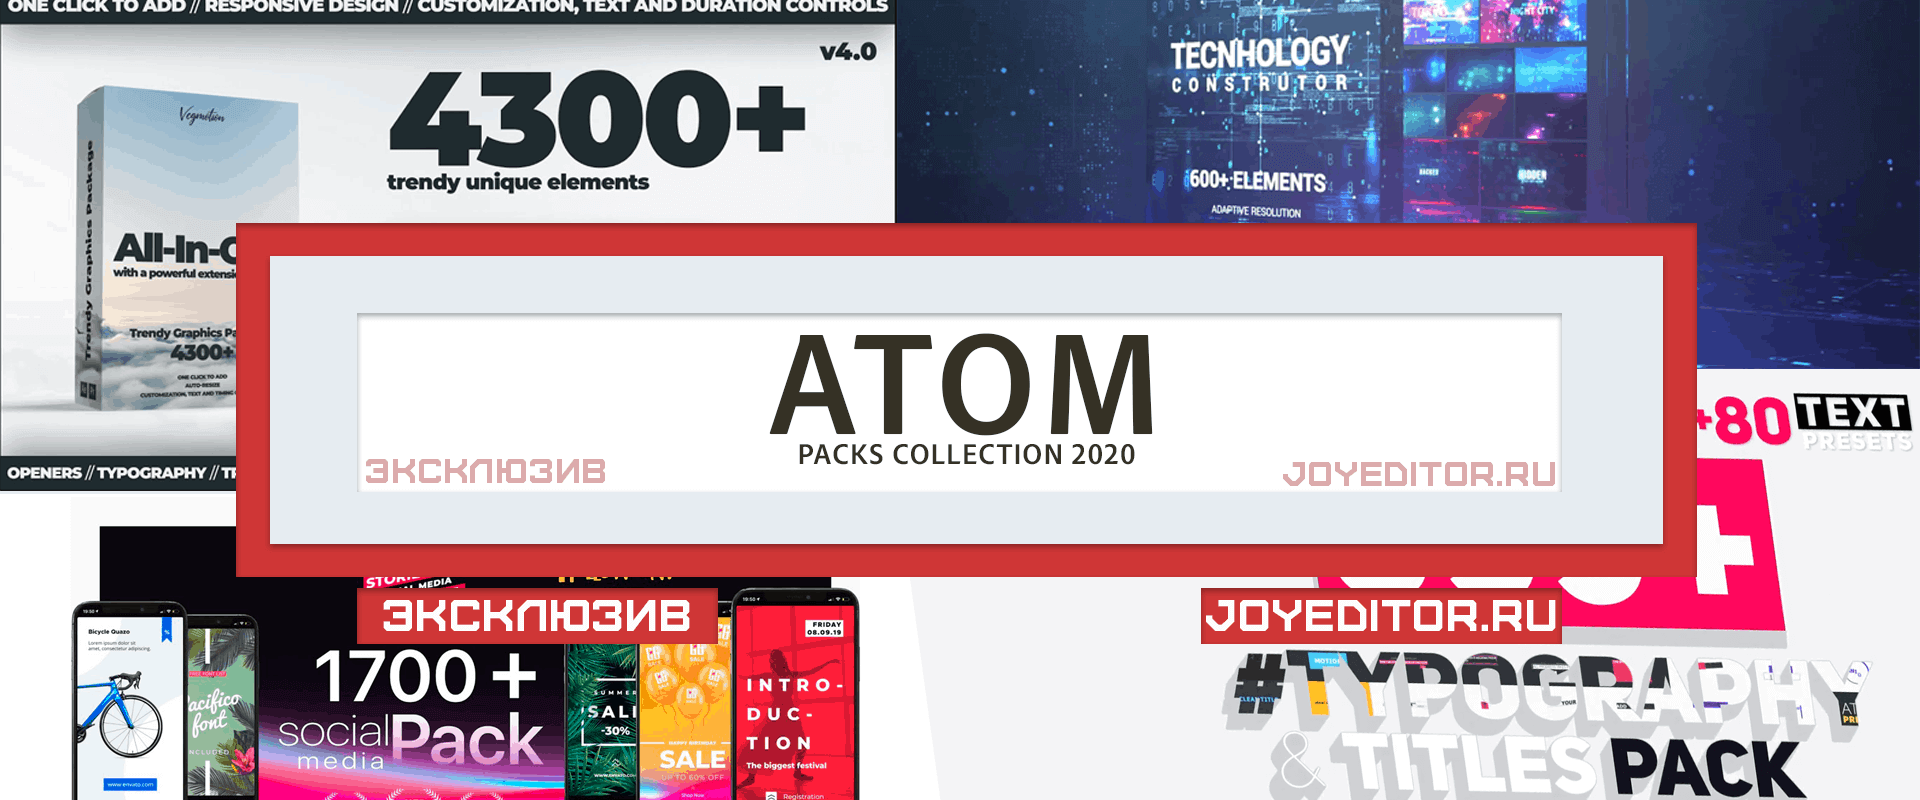 ATOM PACKS COLLECTION 2020